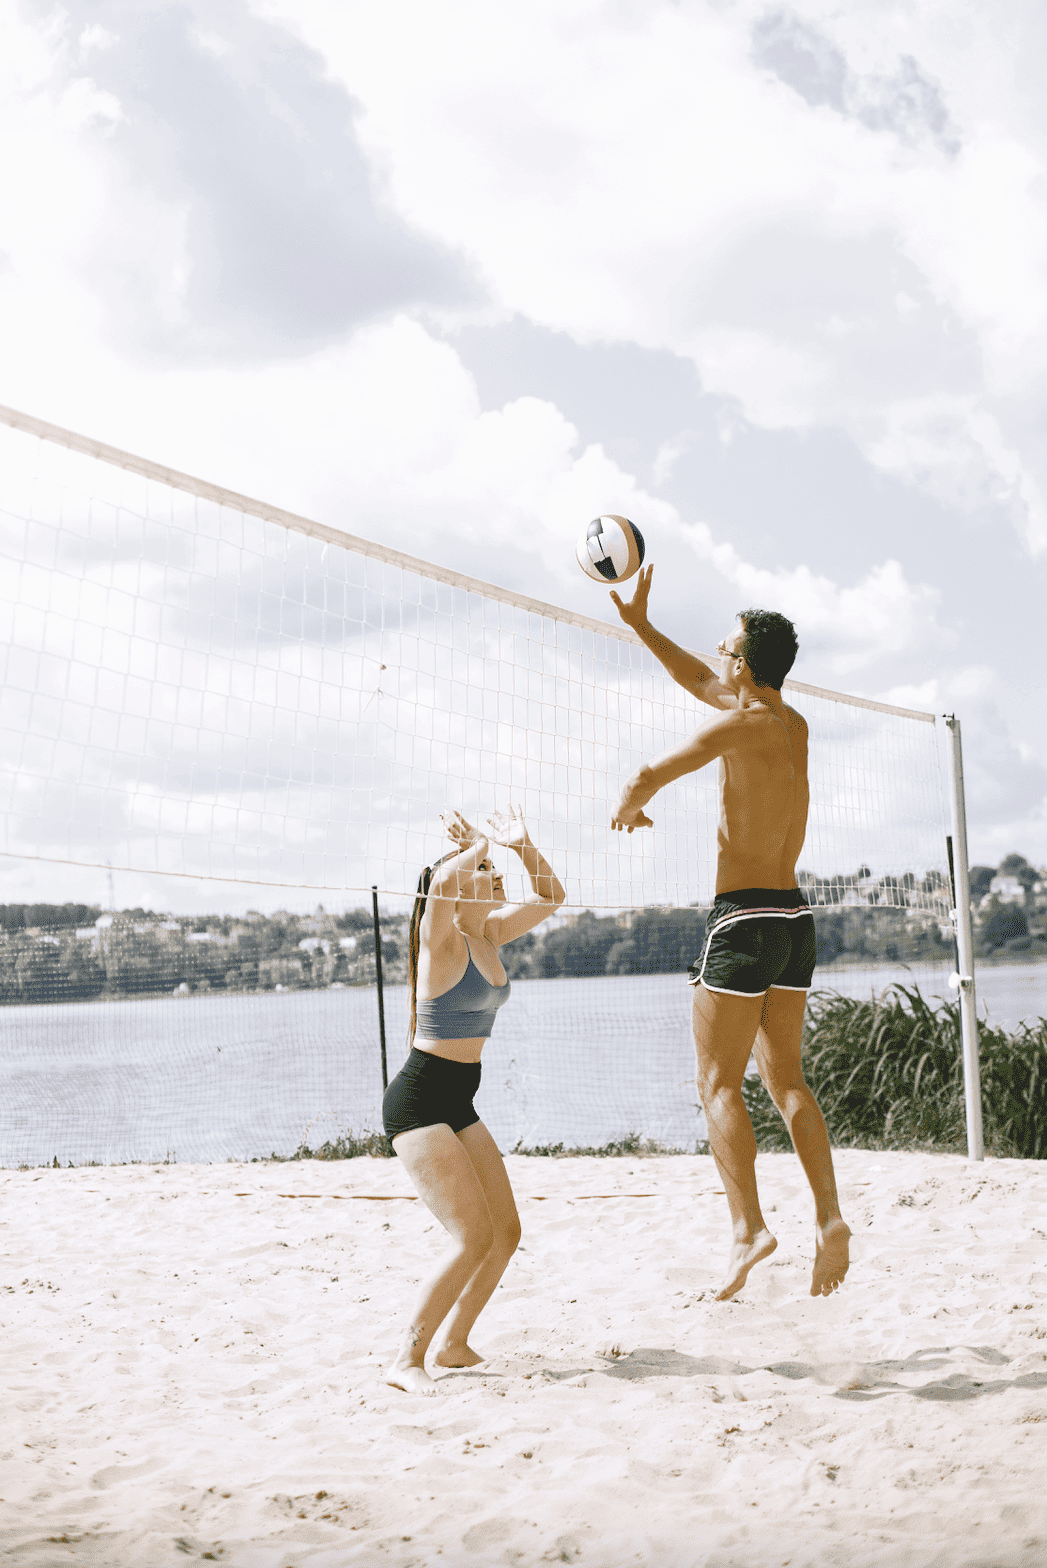 Summer hobbies for couples